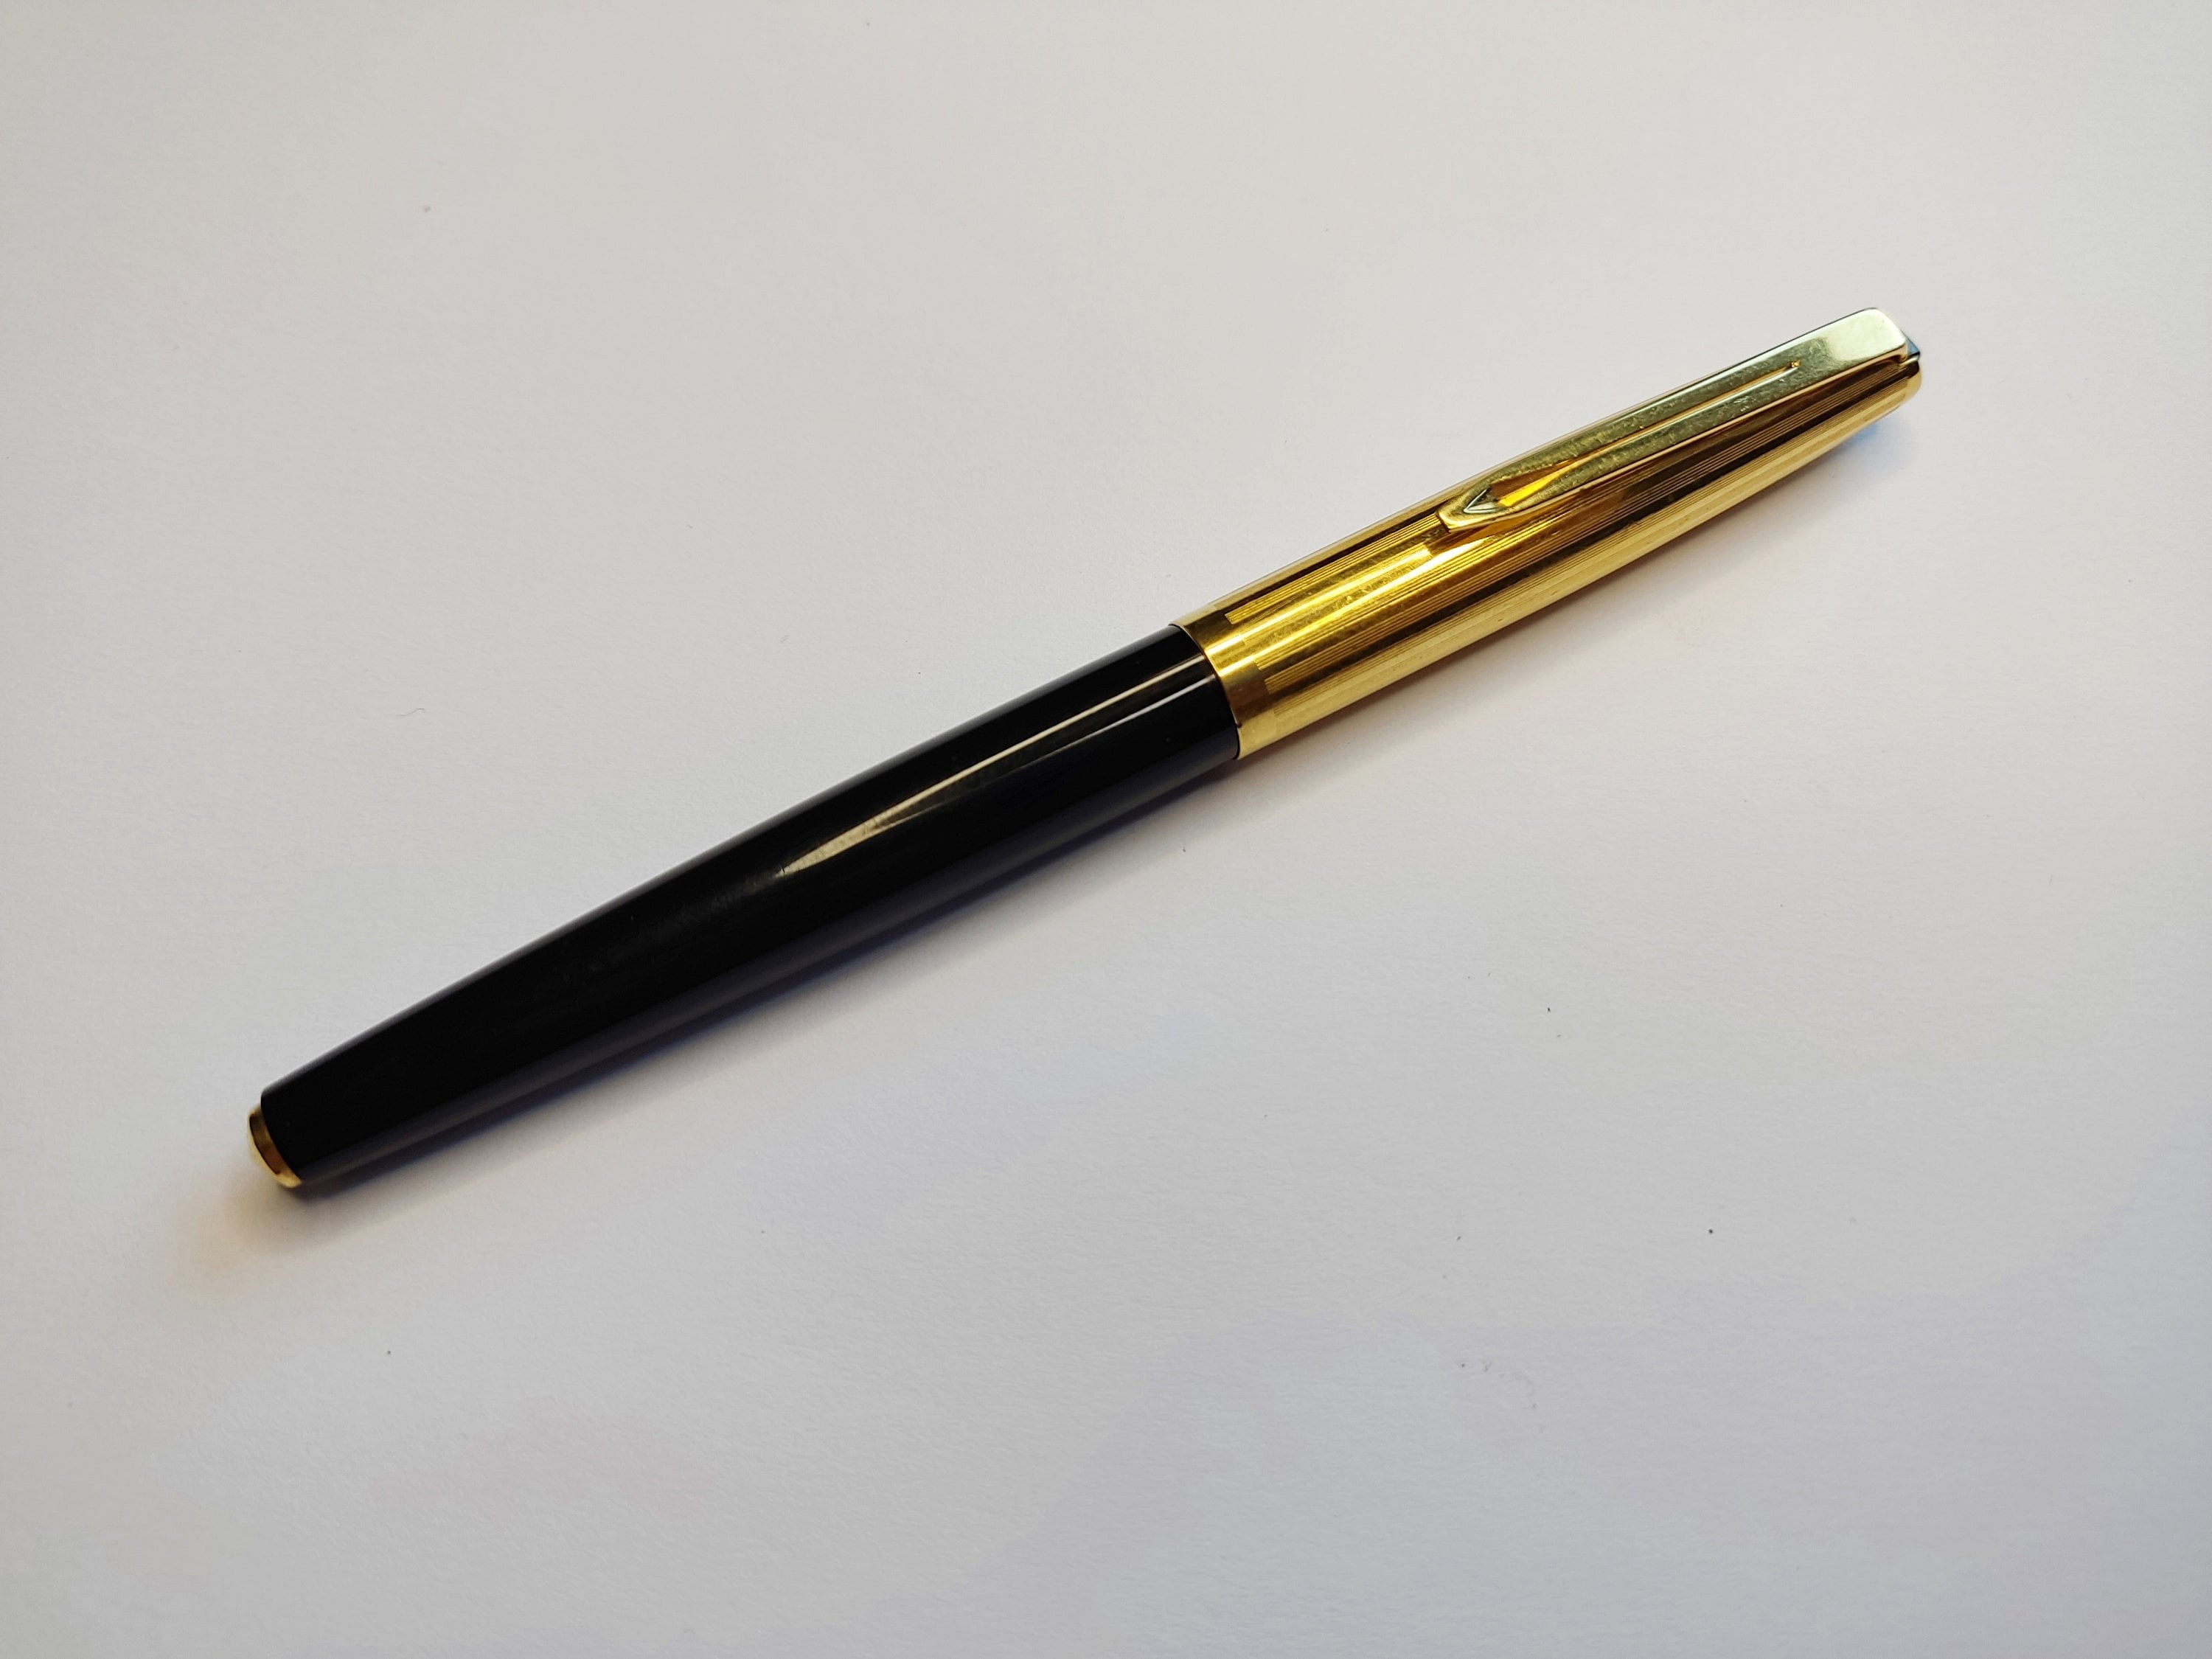 Vintage Sheaffer Fountain Pen With 14k Gold Nib and Retracting Pencil Set 